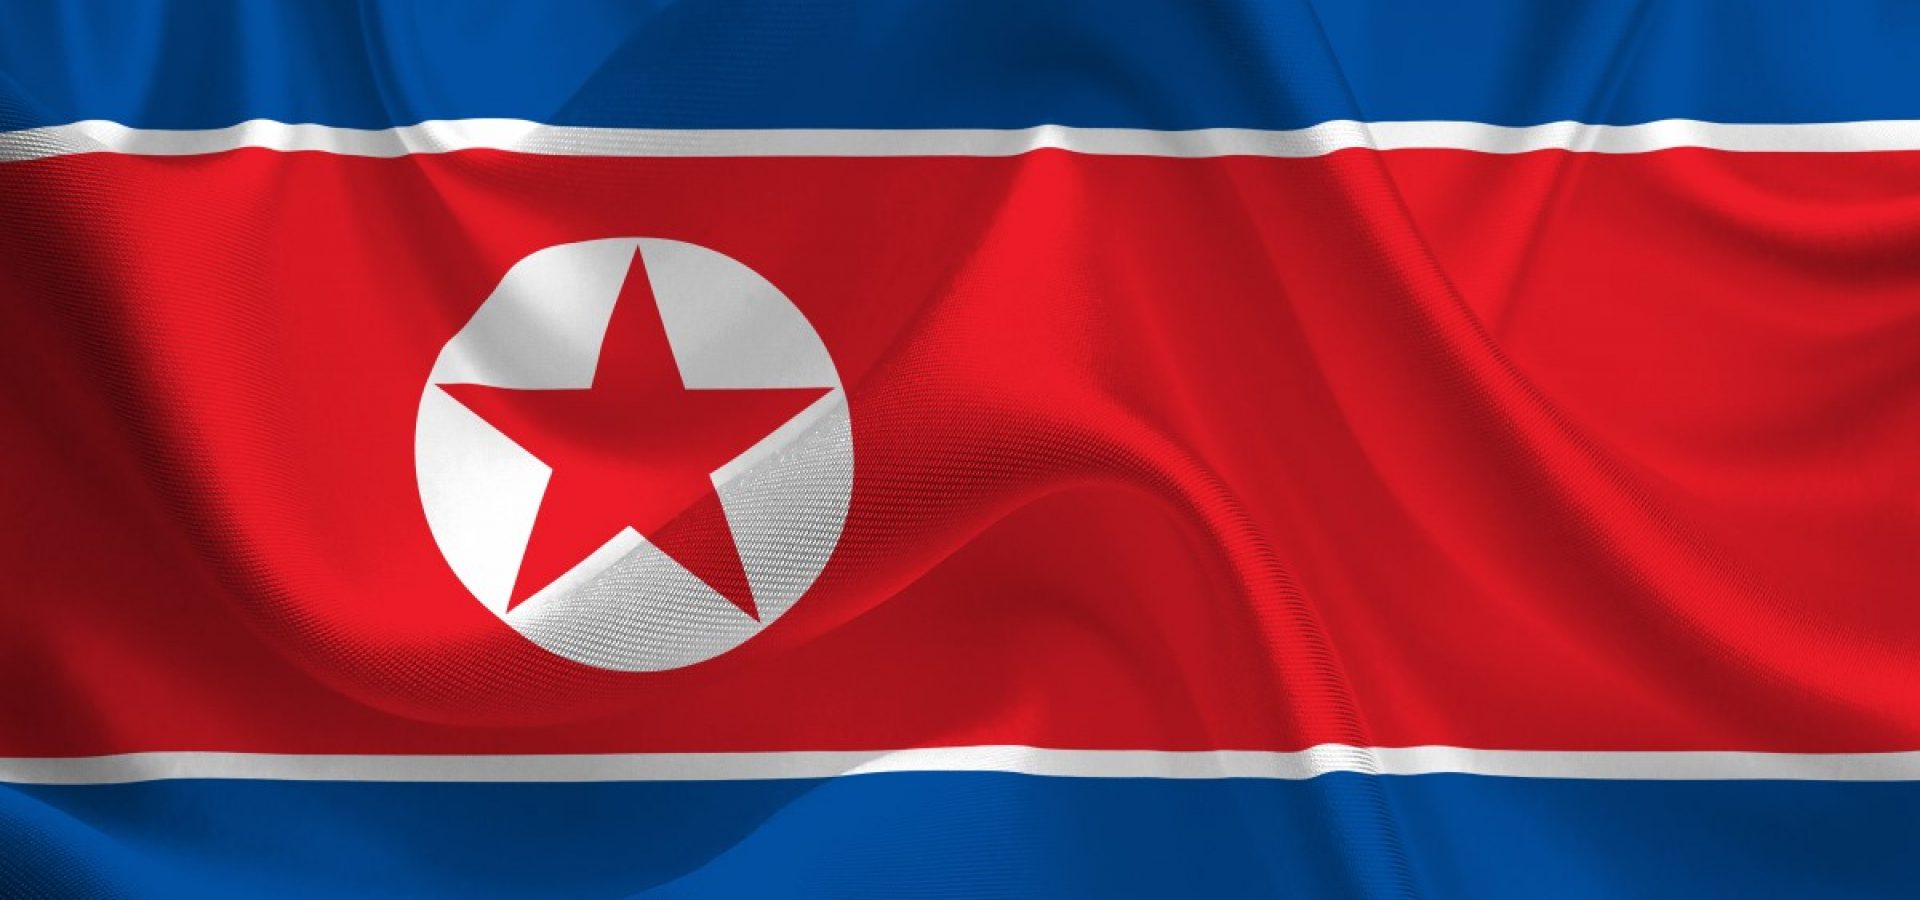 Crypto, North Korea, and illegal activities